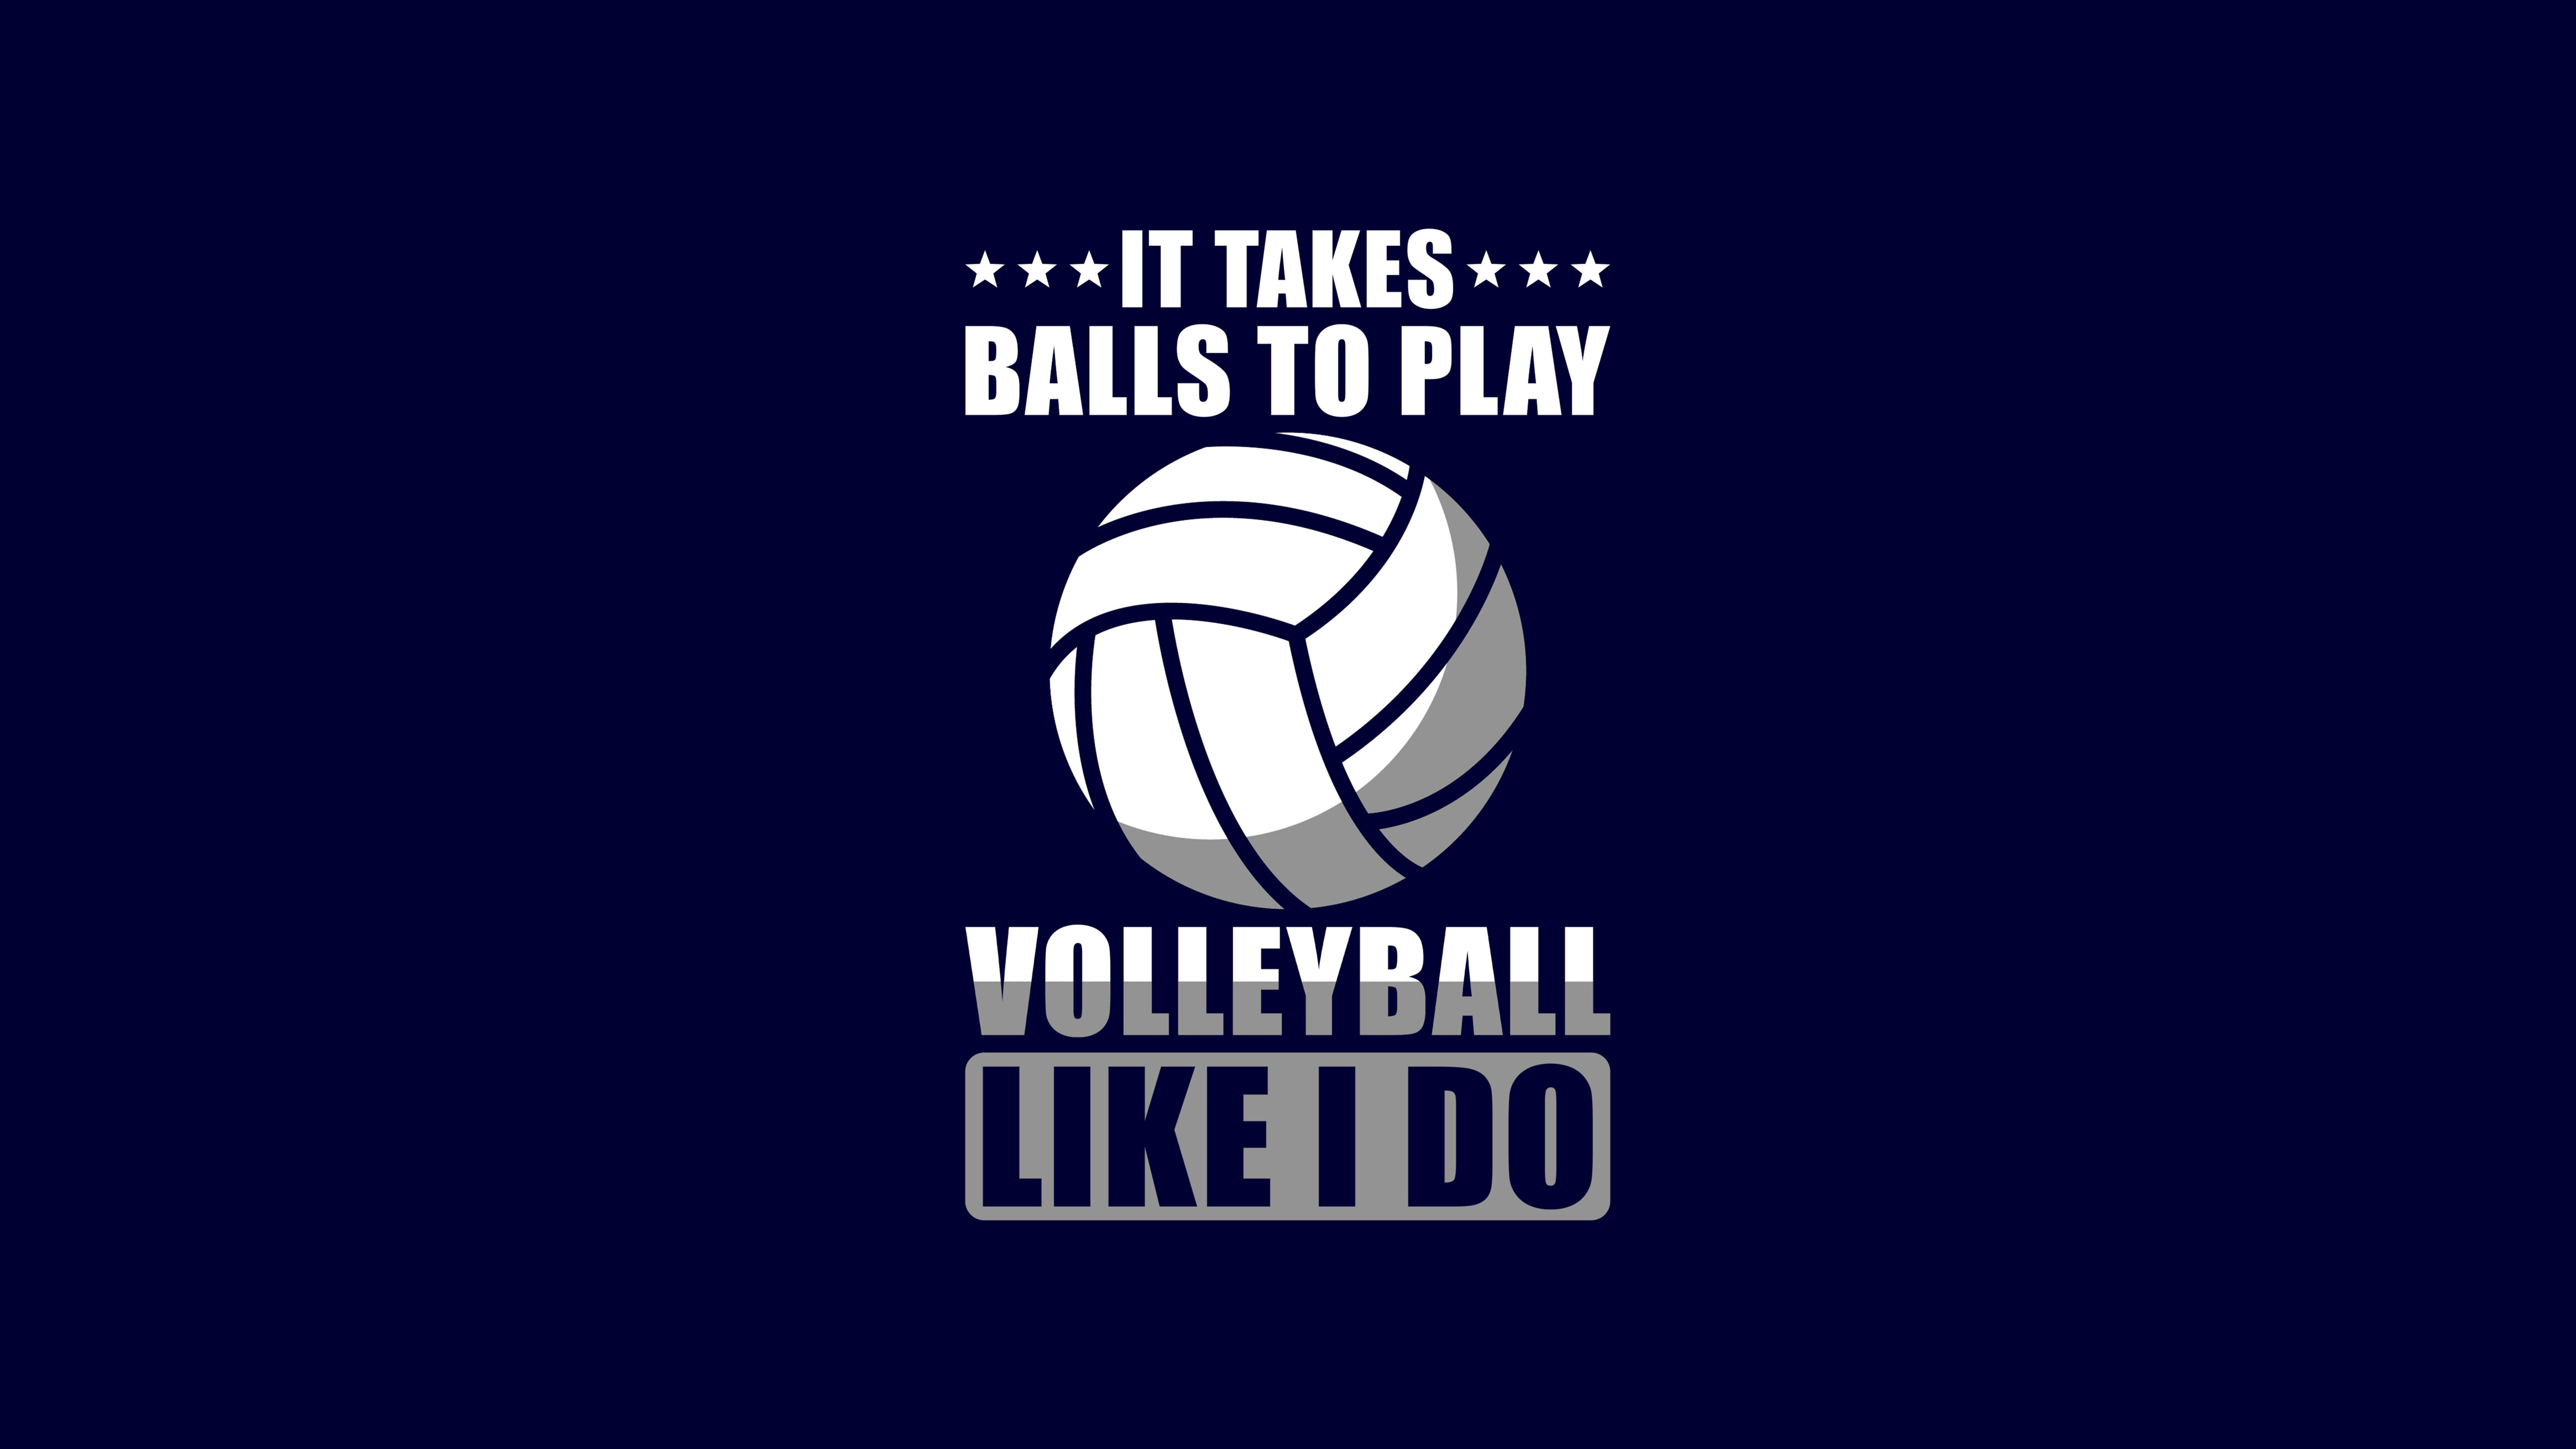 Free download Cool Volleyball Wallpapers Jonas reckermann wallpaper  800x600 for your Desktop Mobile  Tablet  Explore 43 Volleyball  Wallpaper Design  Volleyball Backgrounds Cool Wallpaper Design Volleyball  Wallpapers